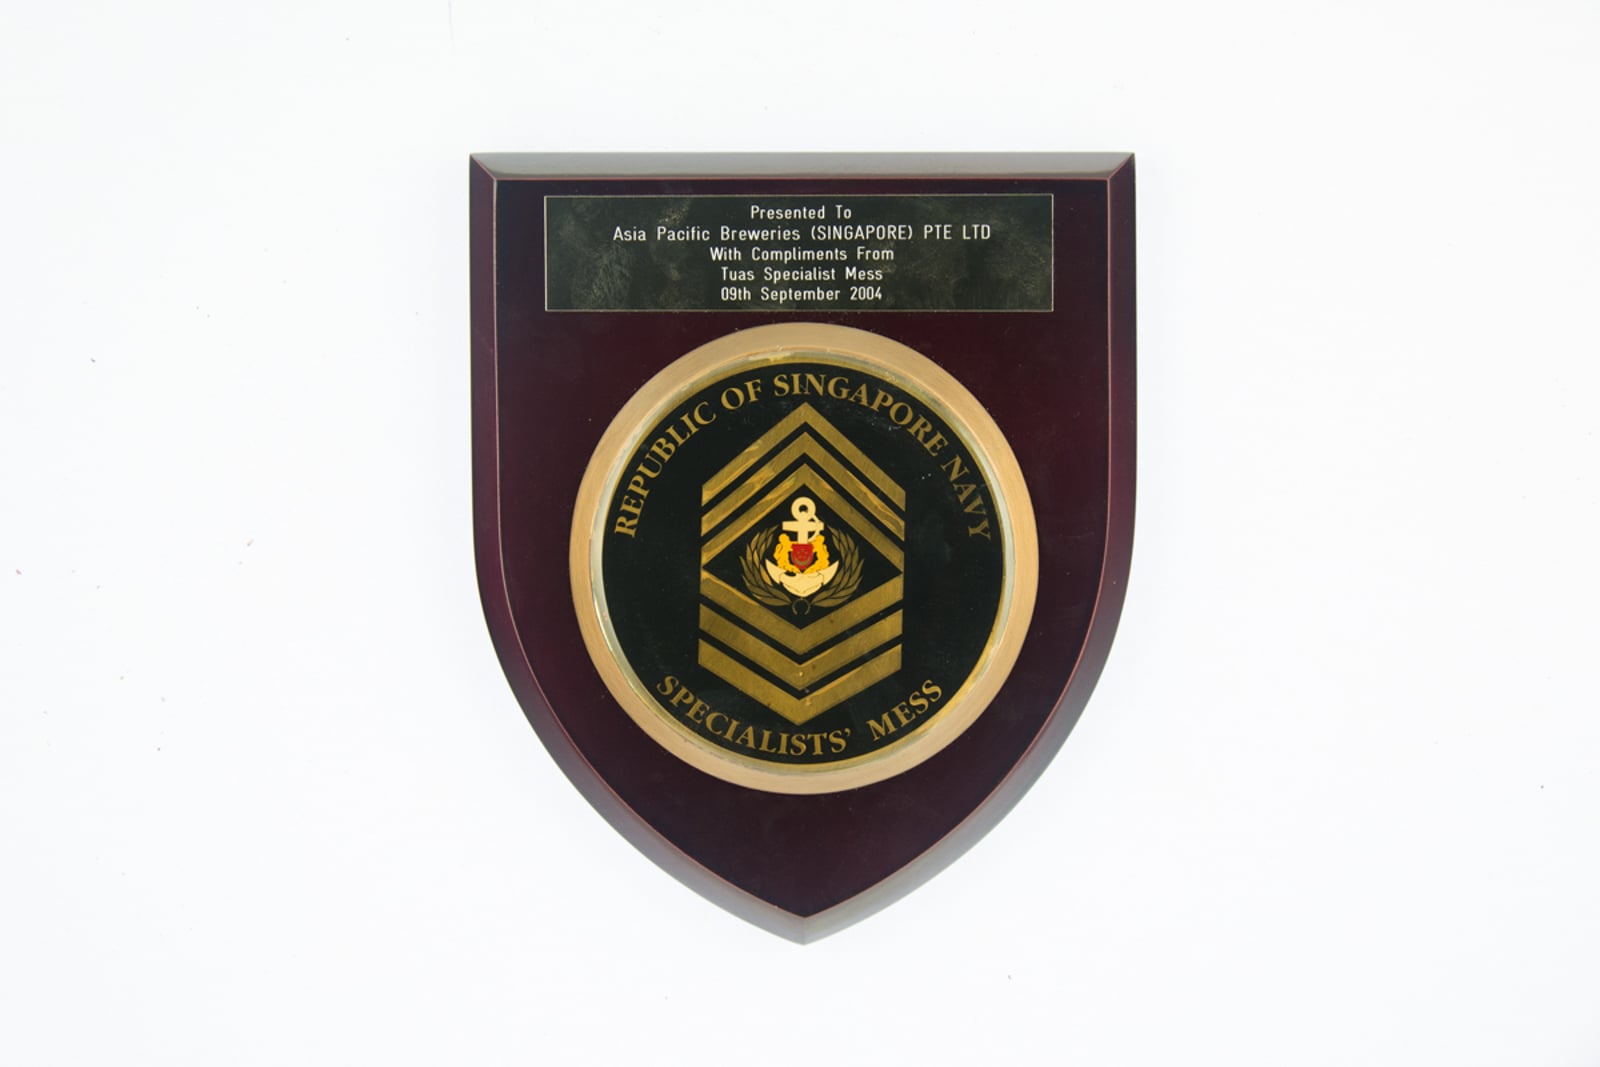 Republic of Singapore Navy Specialists' Mess Plaque 2004